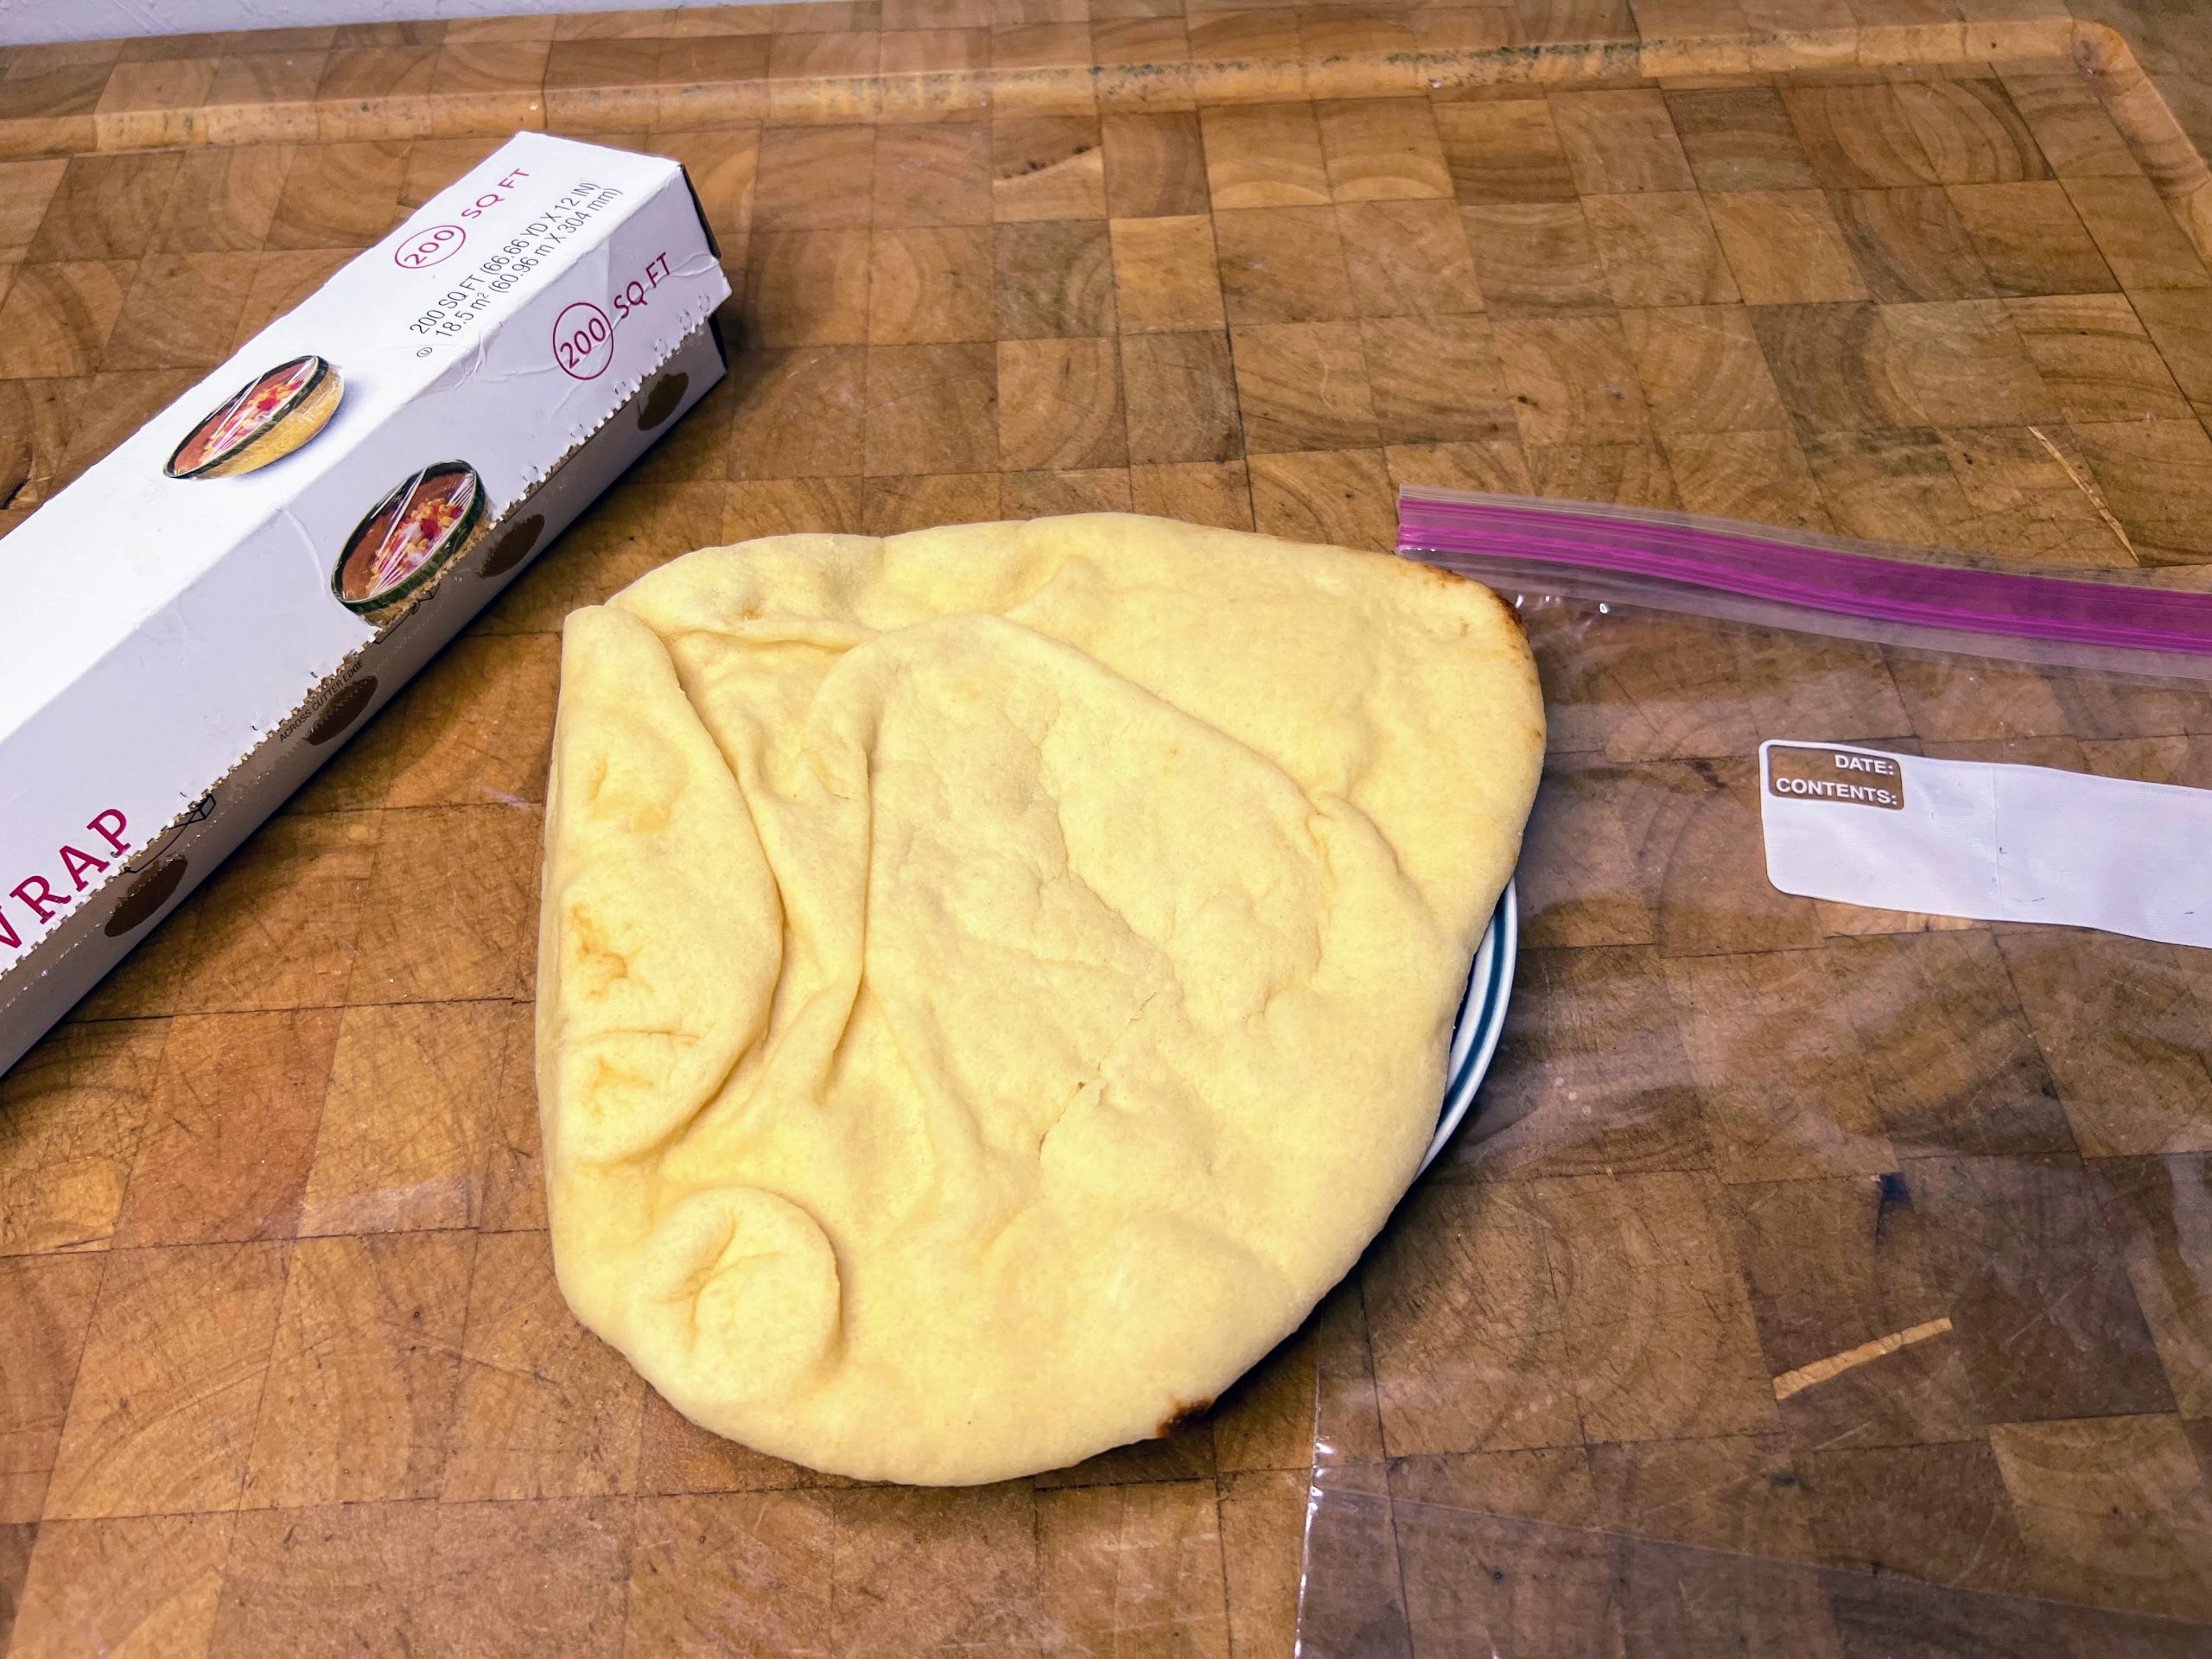 naan bread on a plate next to an empty freezer bag and plastic wrap